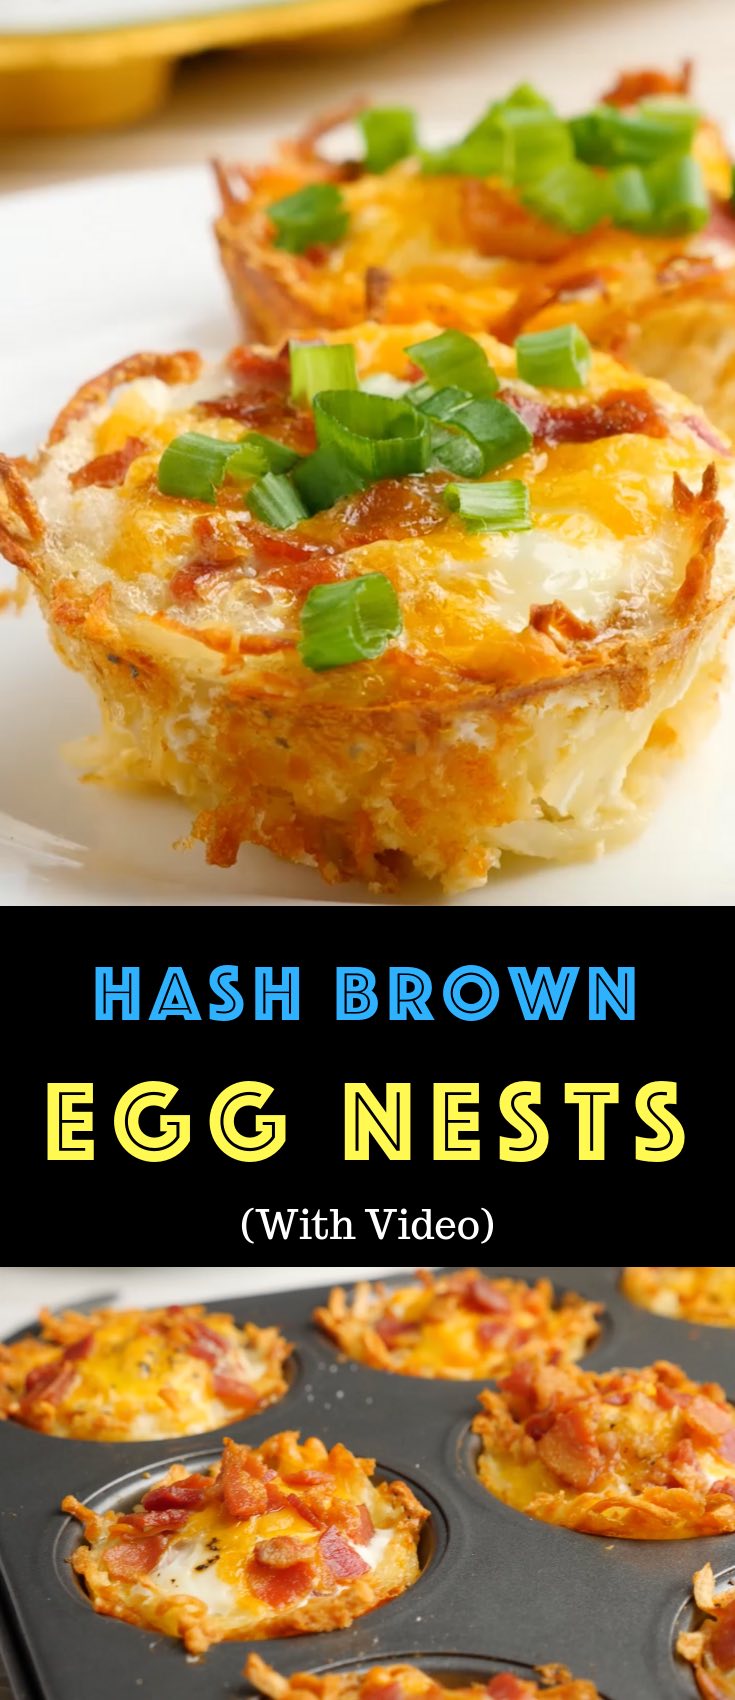 Hash Brown Egg Nests are a delicious breakfast or brunch idea you can make ahead. They’re soft on the inside, and crispy golden on the outside. They’re great for a quick weekday breakfast, and also perfect for feeding a crowd. Plus, video tutorial!